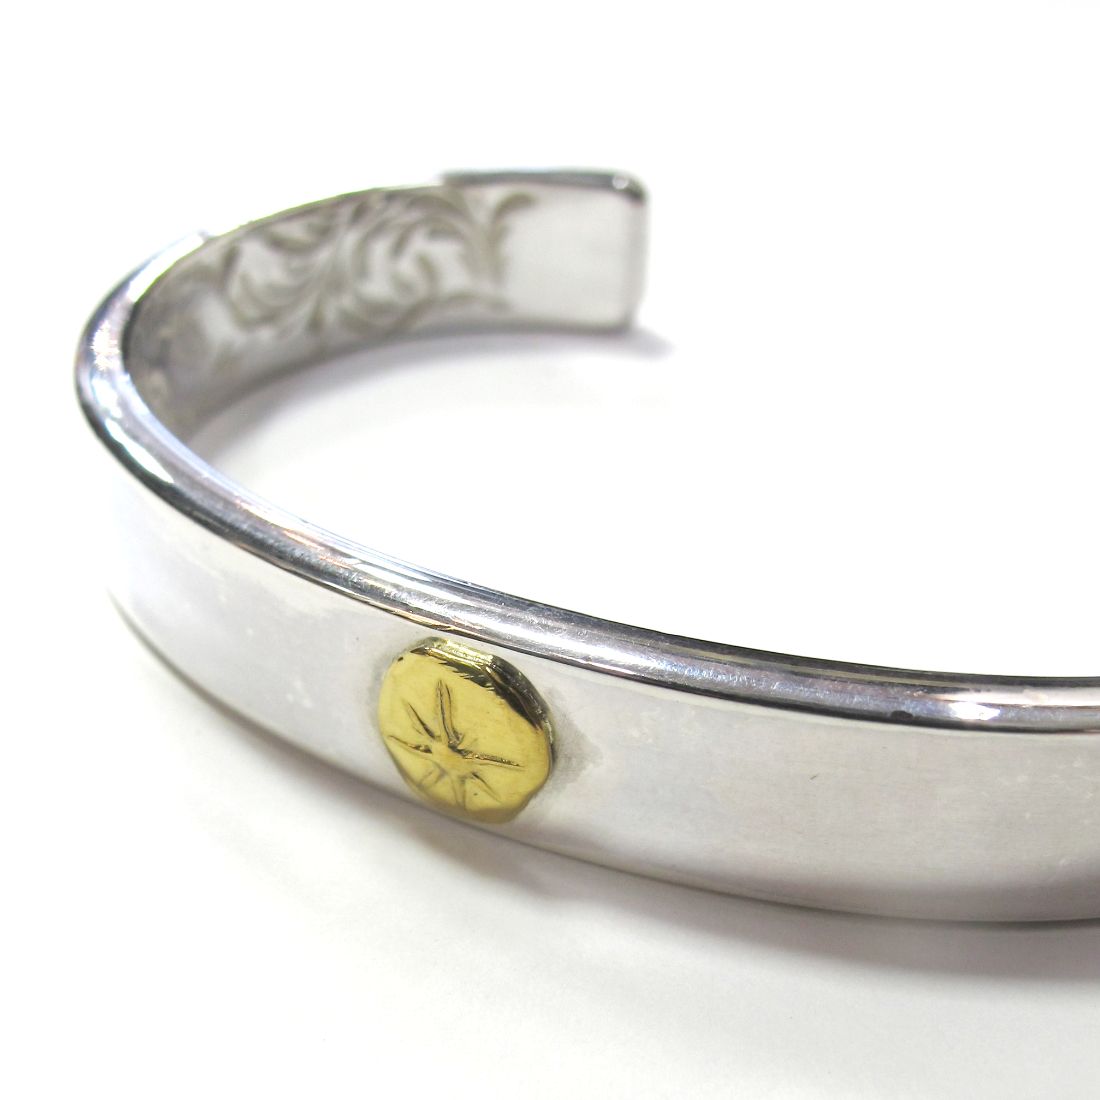 STUDIO T&Y - 【ラスト1点】Plain Bangle 10mm width with Gold Point ...